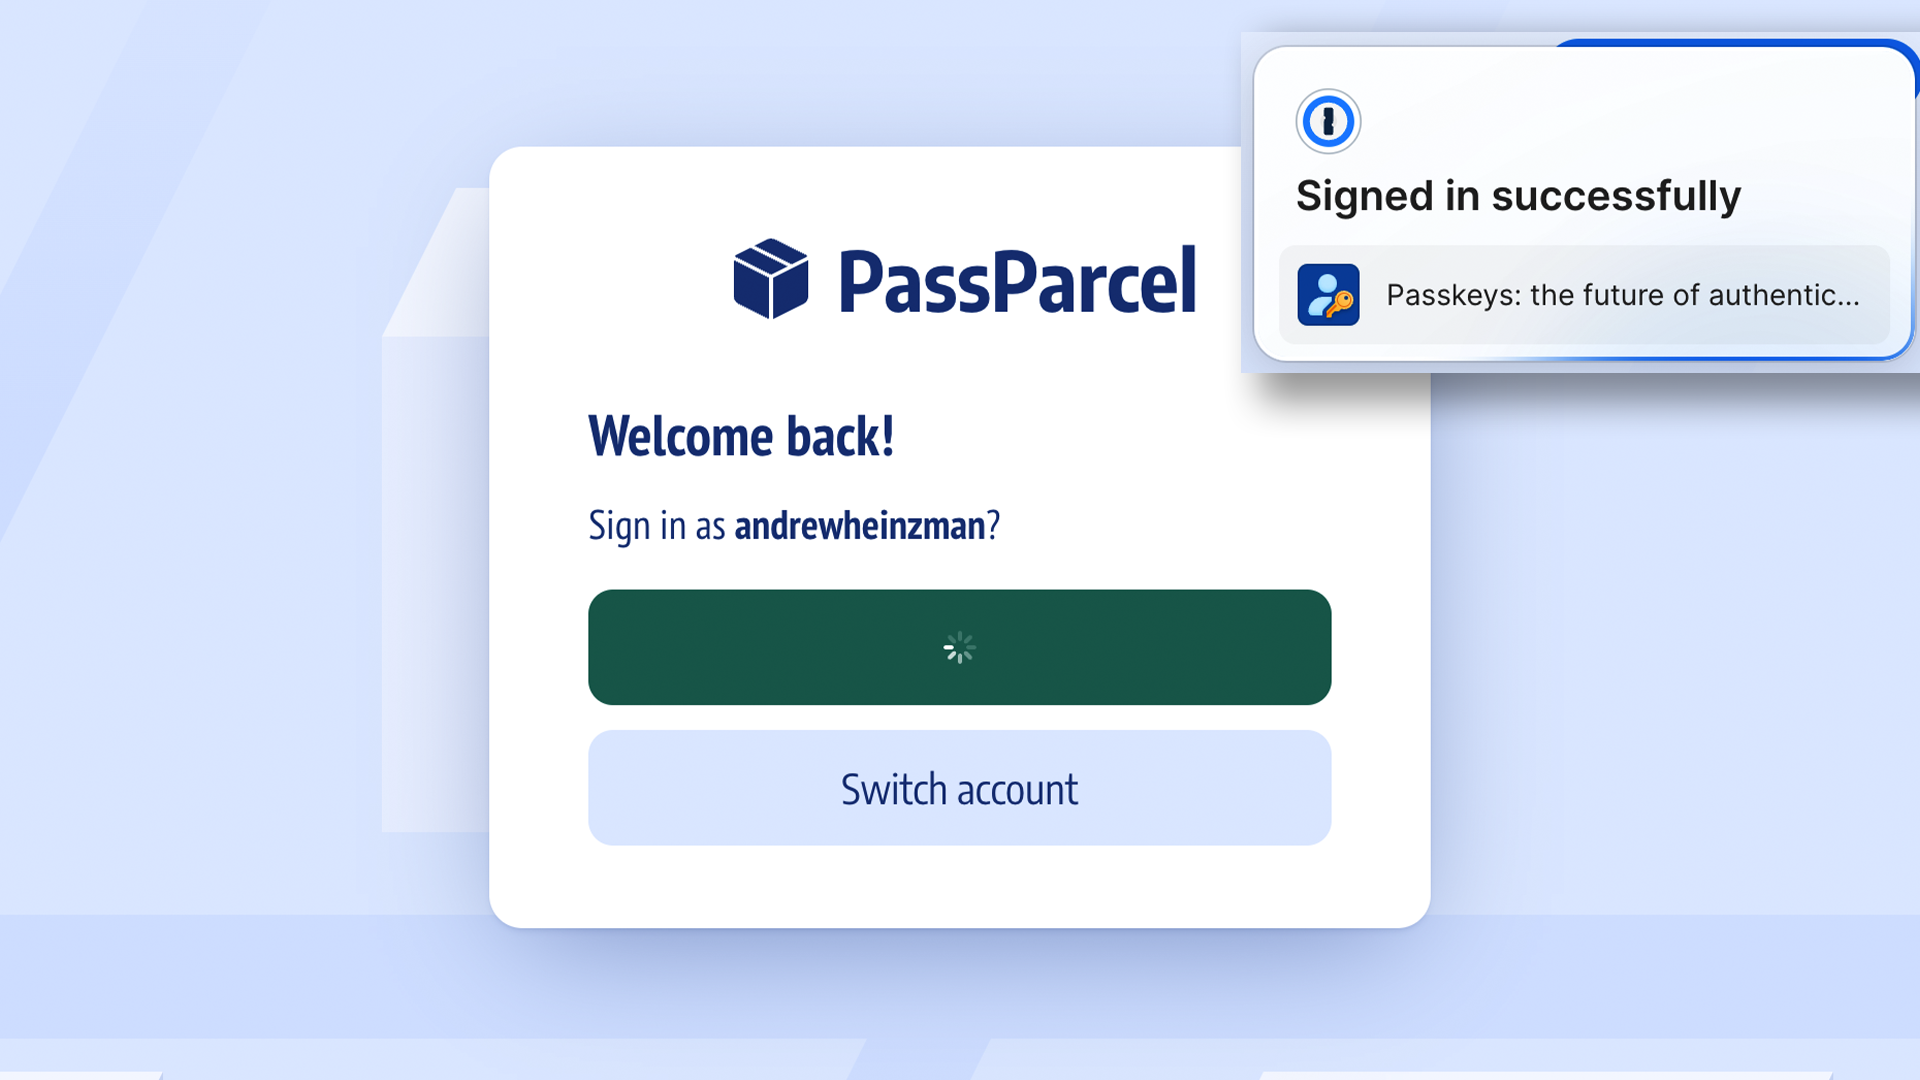 The PassParcel demo showing that I've logged in with a Passkey.